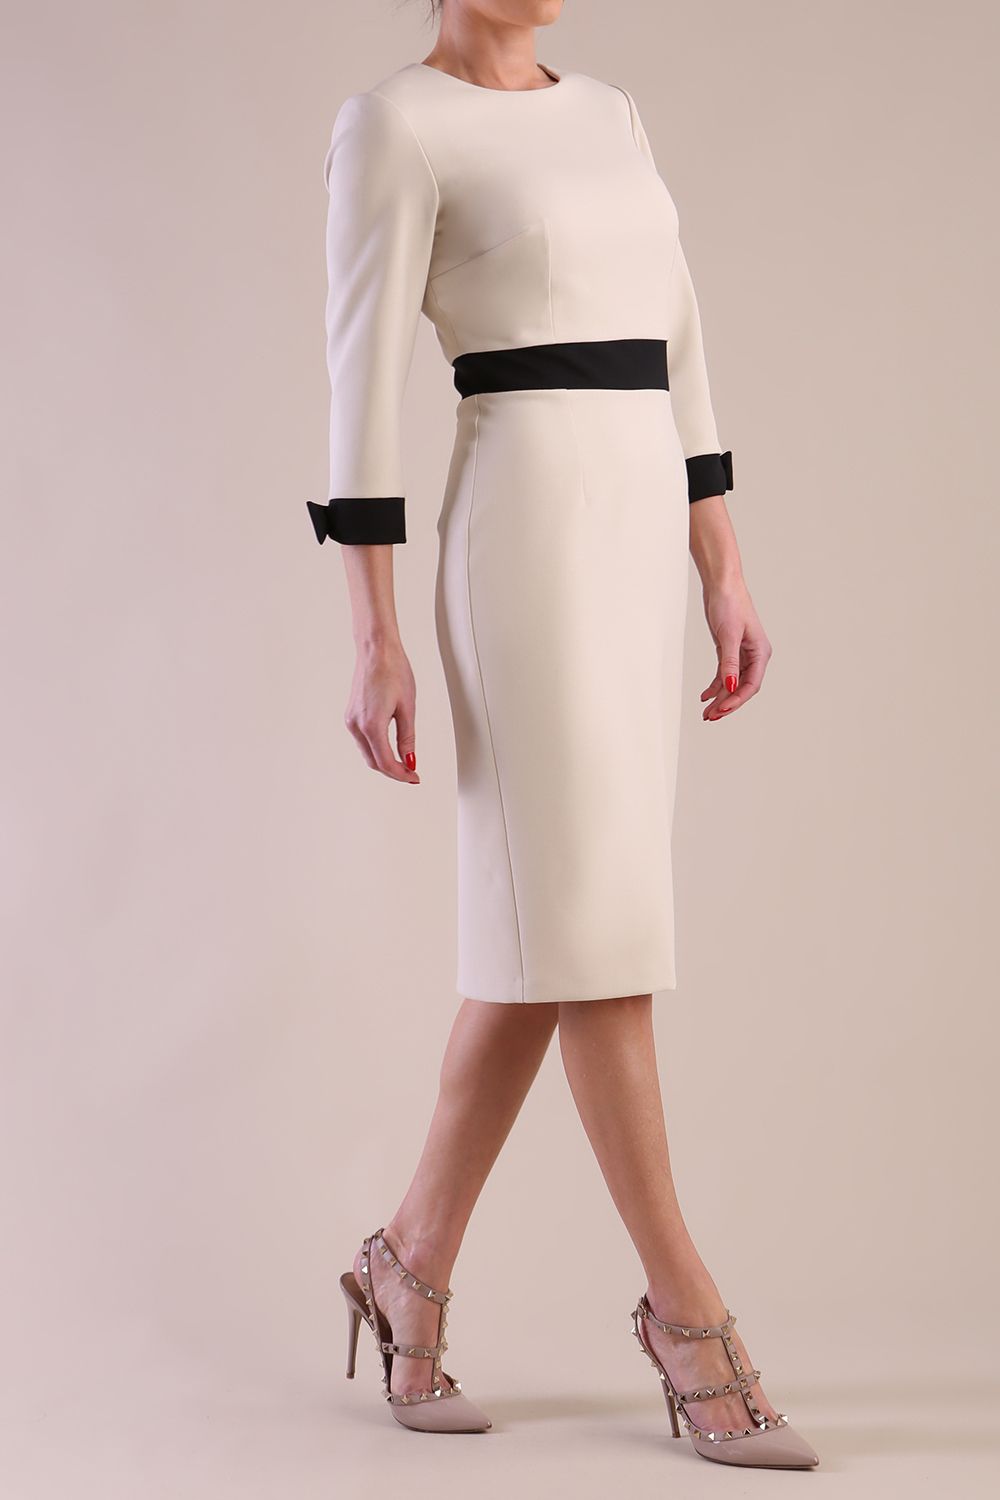 Model wearing diva catwalk Reese 3/4 Sleeved pencil skirt dress with a contrast sleeve and waistband details in Sandshell Beige/Black